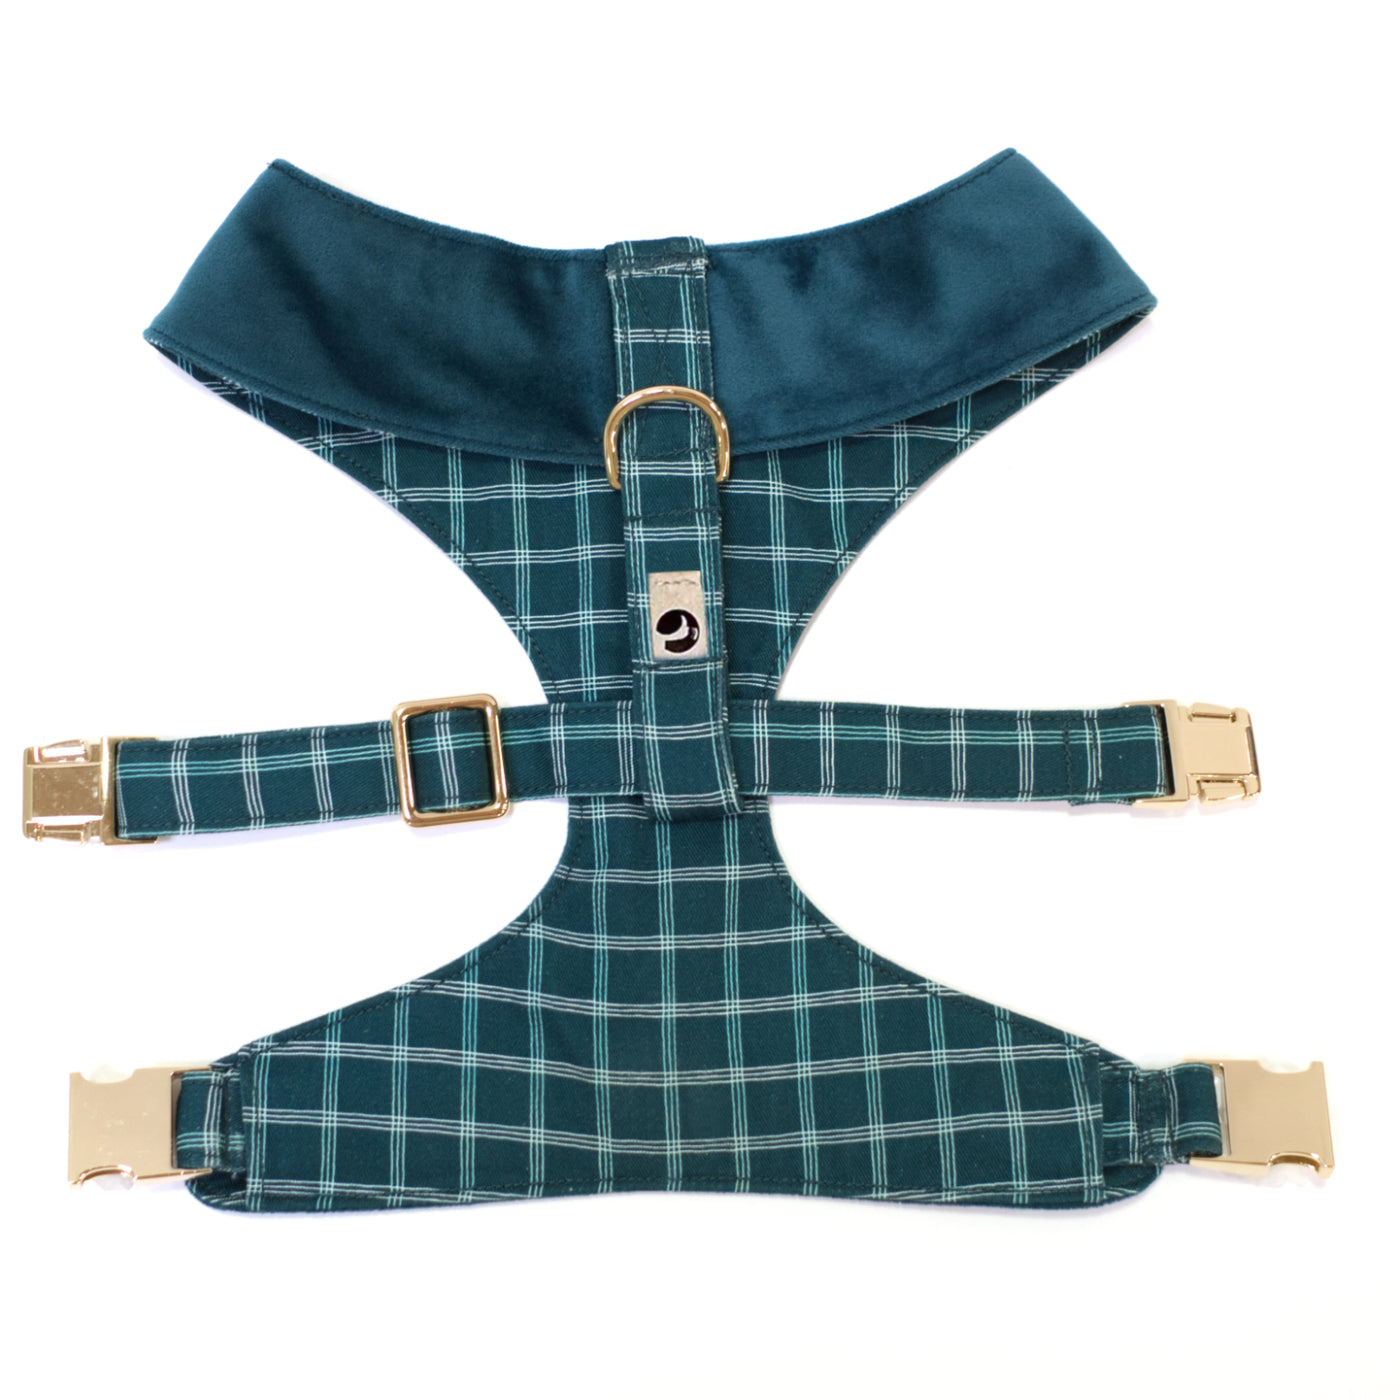 Dark blue velvet and plaid reversible dog harness with gold hardware viewed from top/back